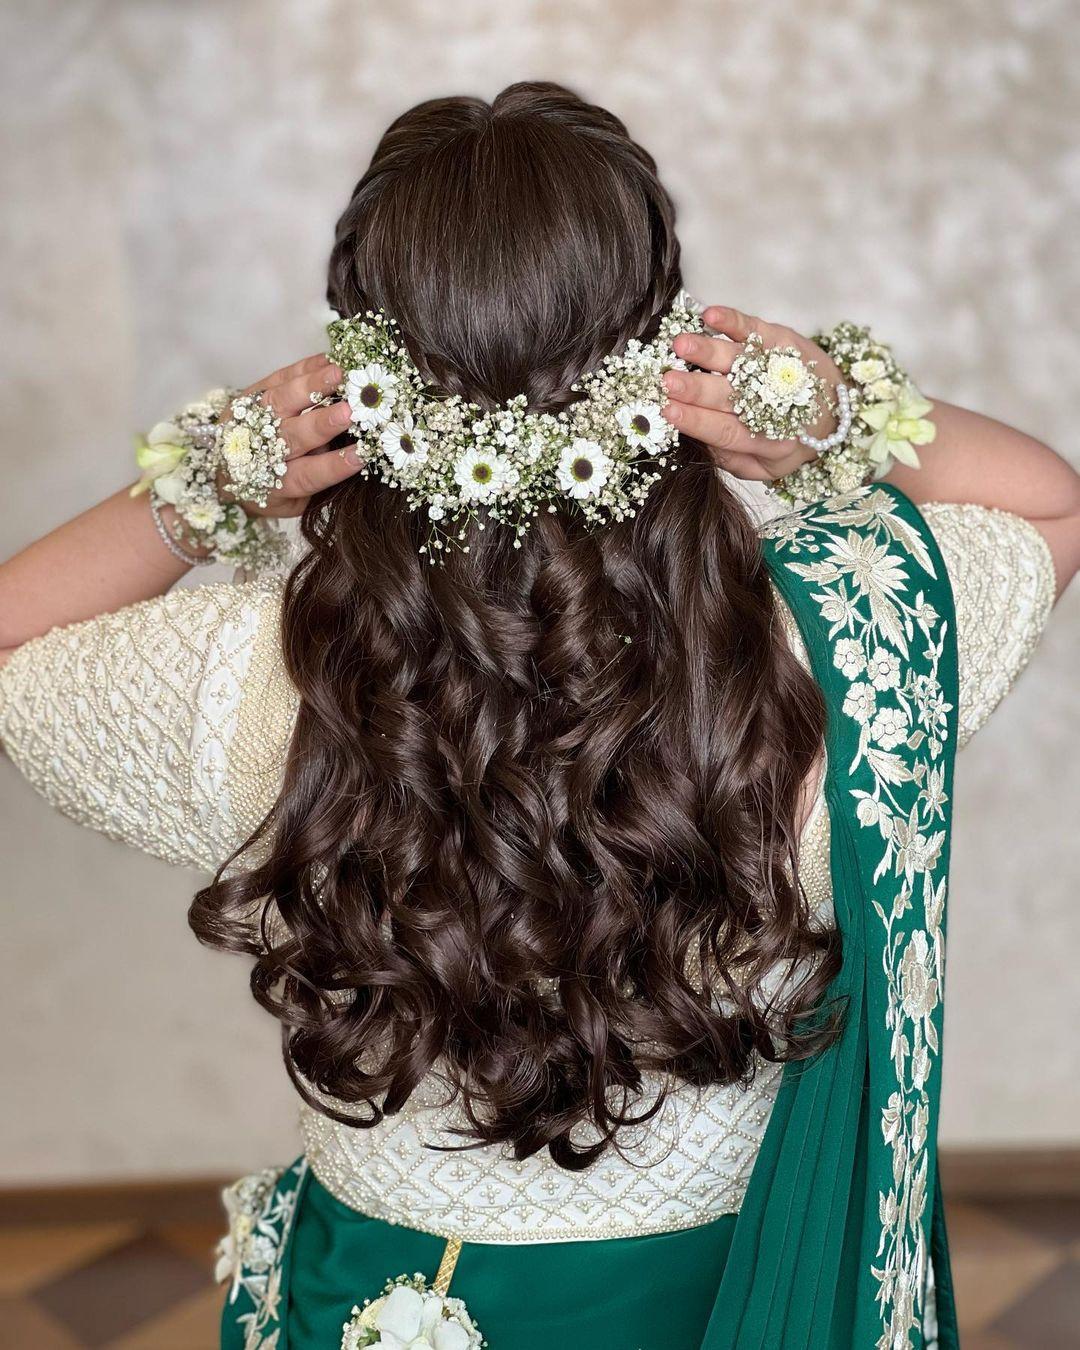 Indian Bridal Hair Style | Are you getting married soon and … | Flickr